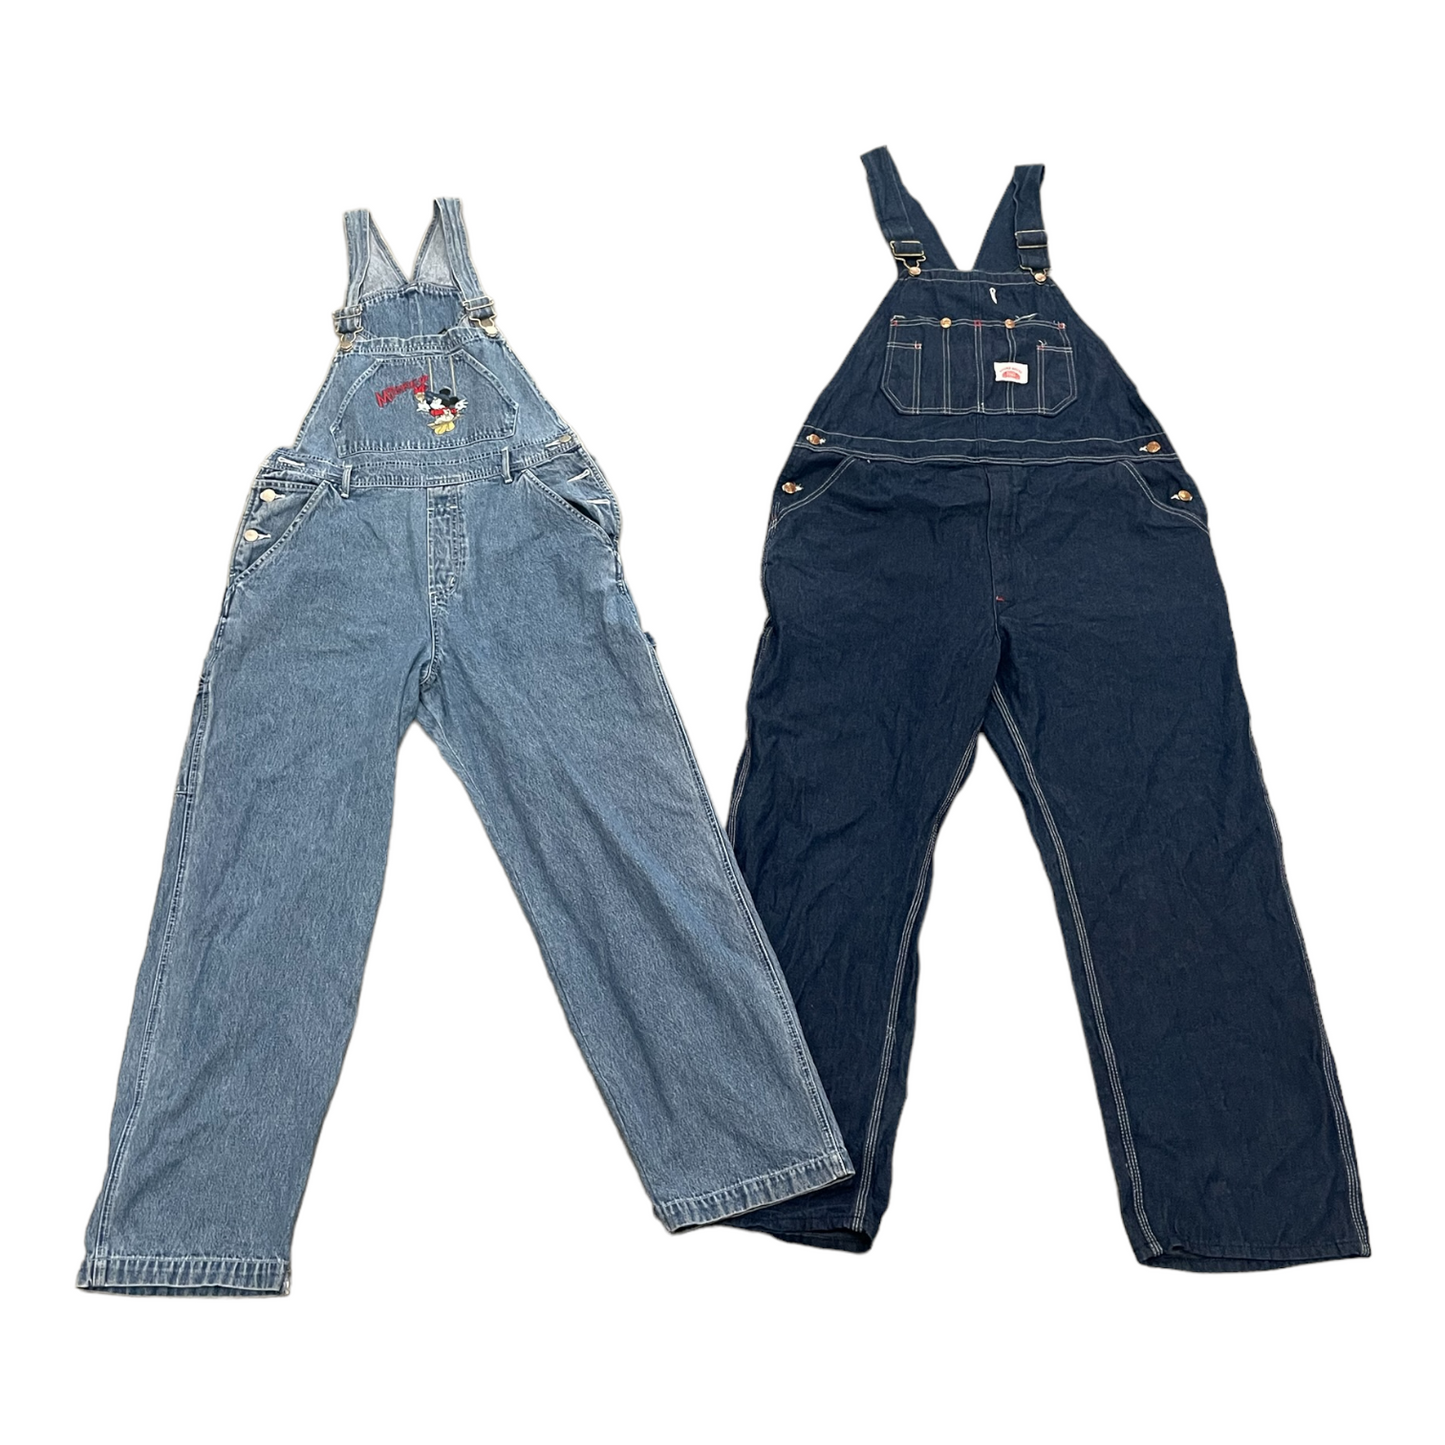 Mens Overalls & Jumpers Intro Pack